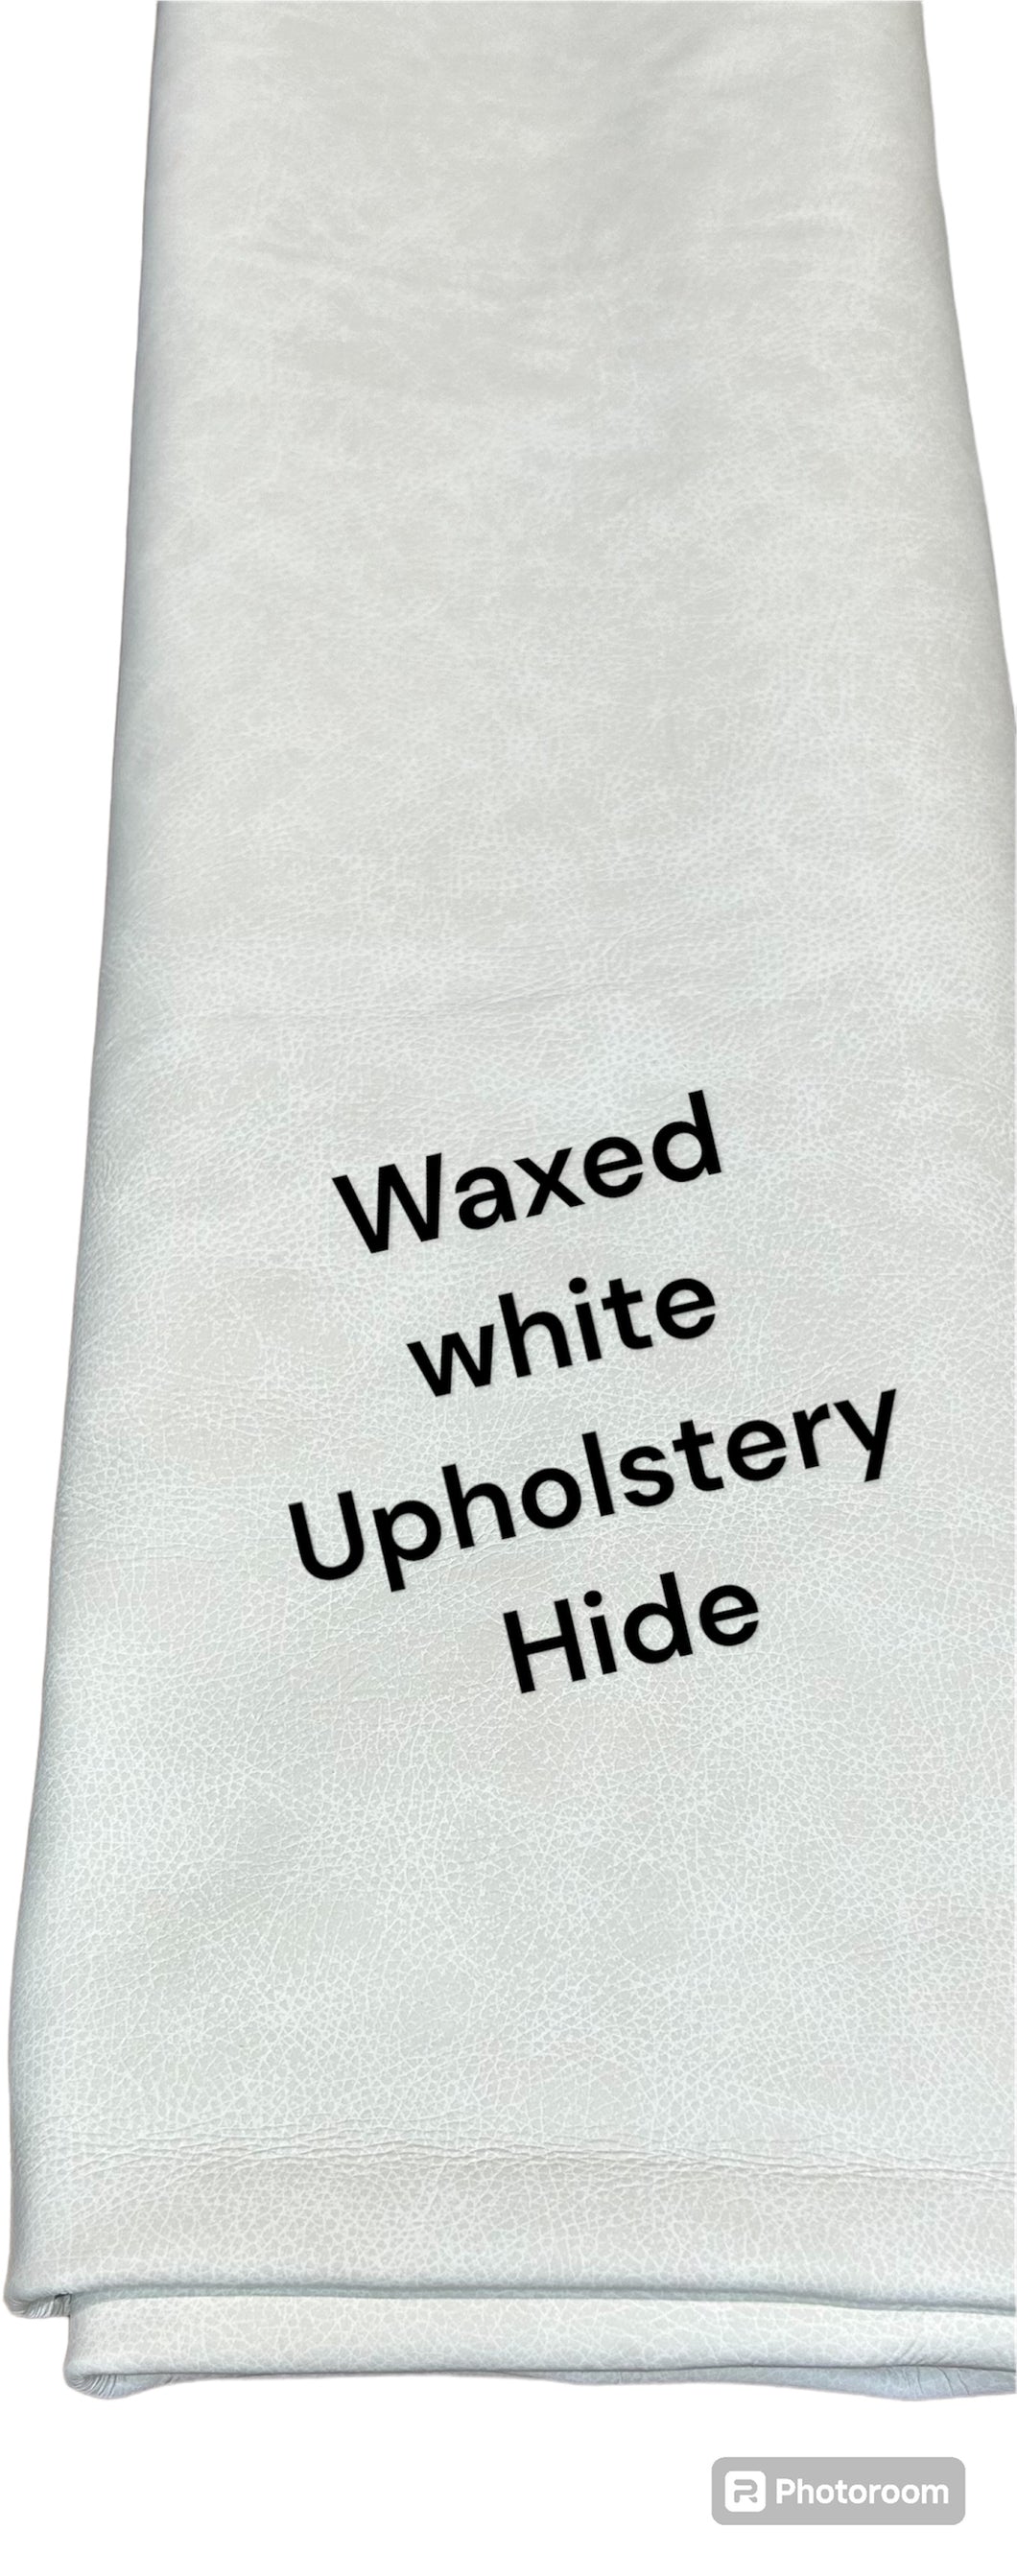 Waxed white upholstery hide